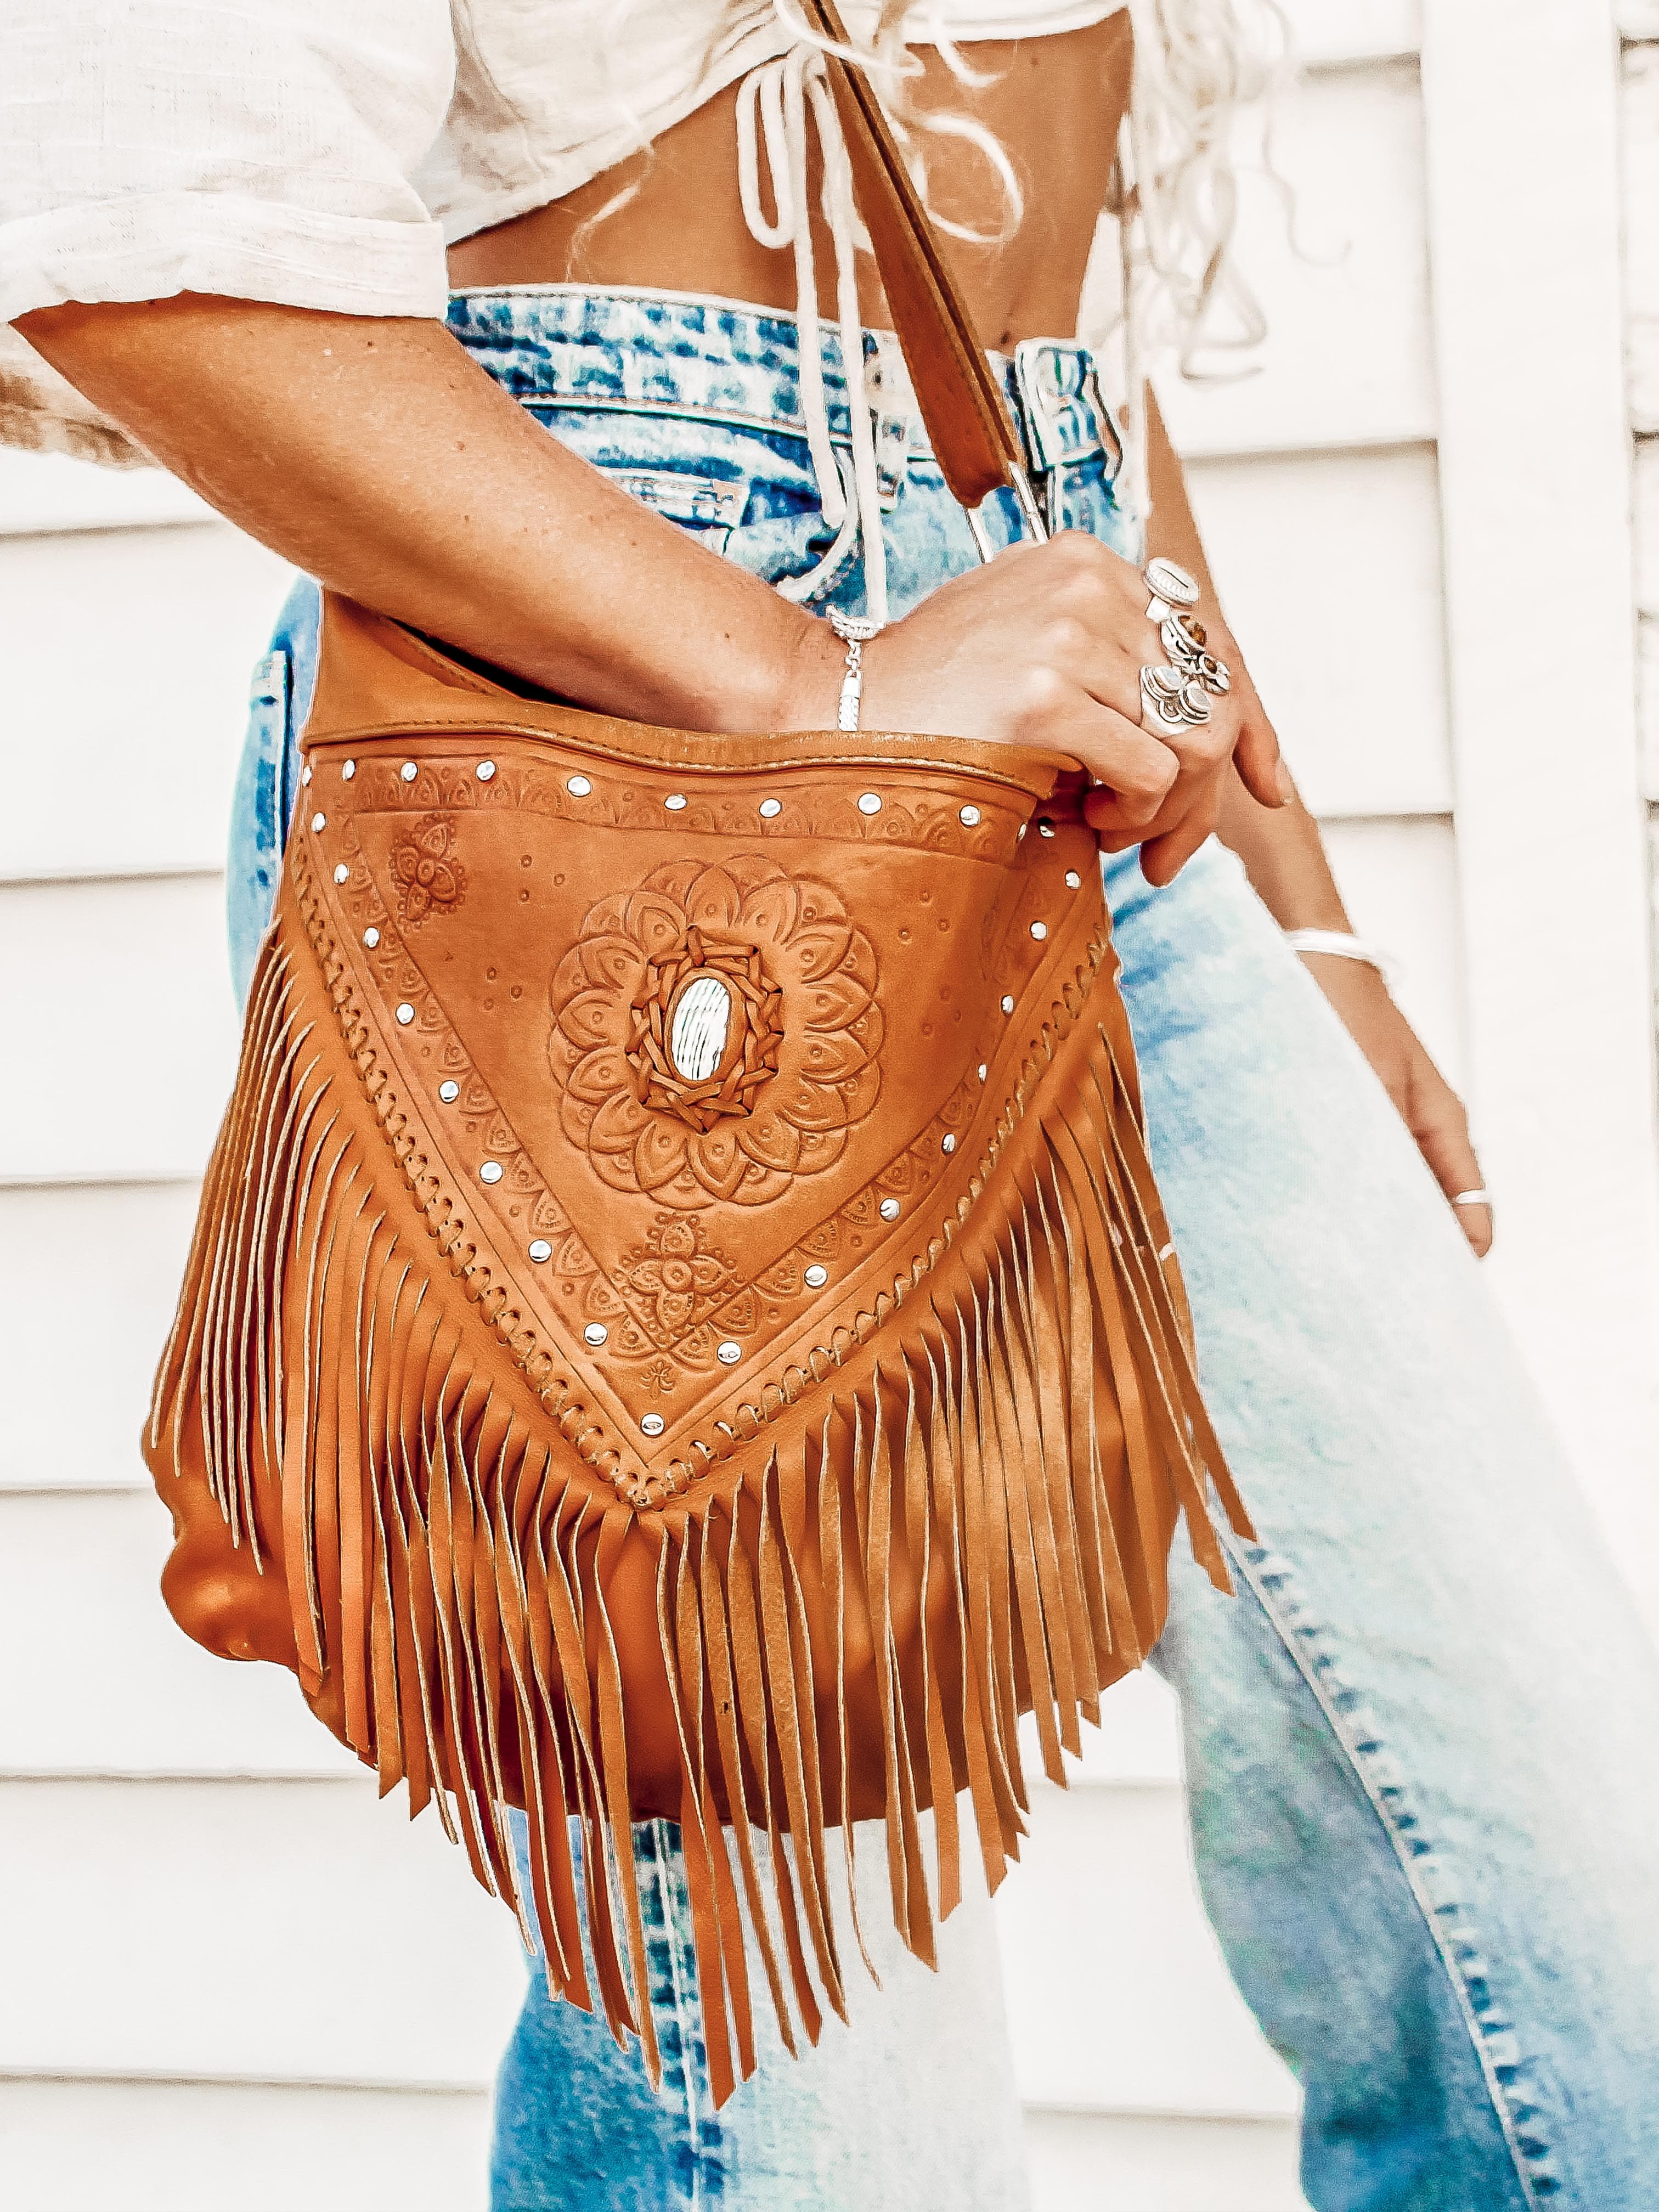 Buy Boho Bag with Brown Fringes | Real Leather | Fringe Purse | Bohemian  Bags | Hobo Tote Handbag at Amazon.in